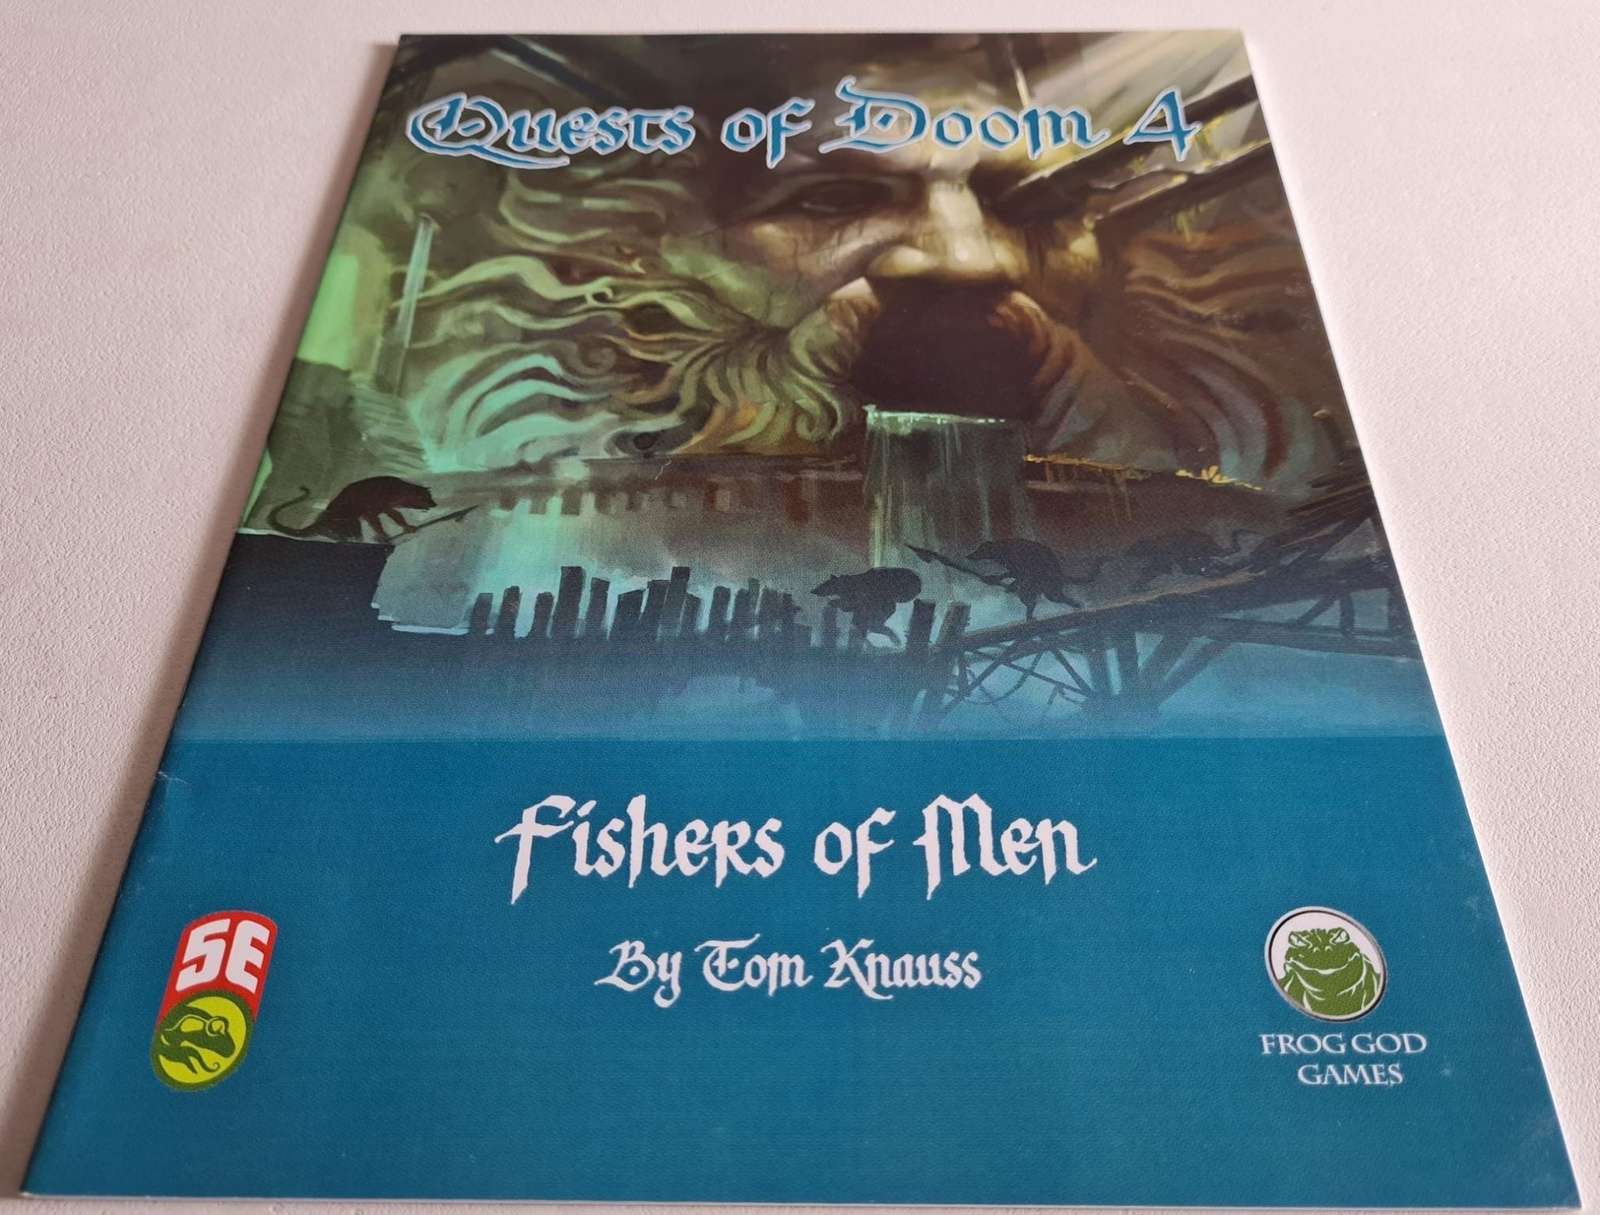 Quests of Doom 4: Fishers of Men - Dungeons and Dragons - 5th Edition (5e)